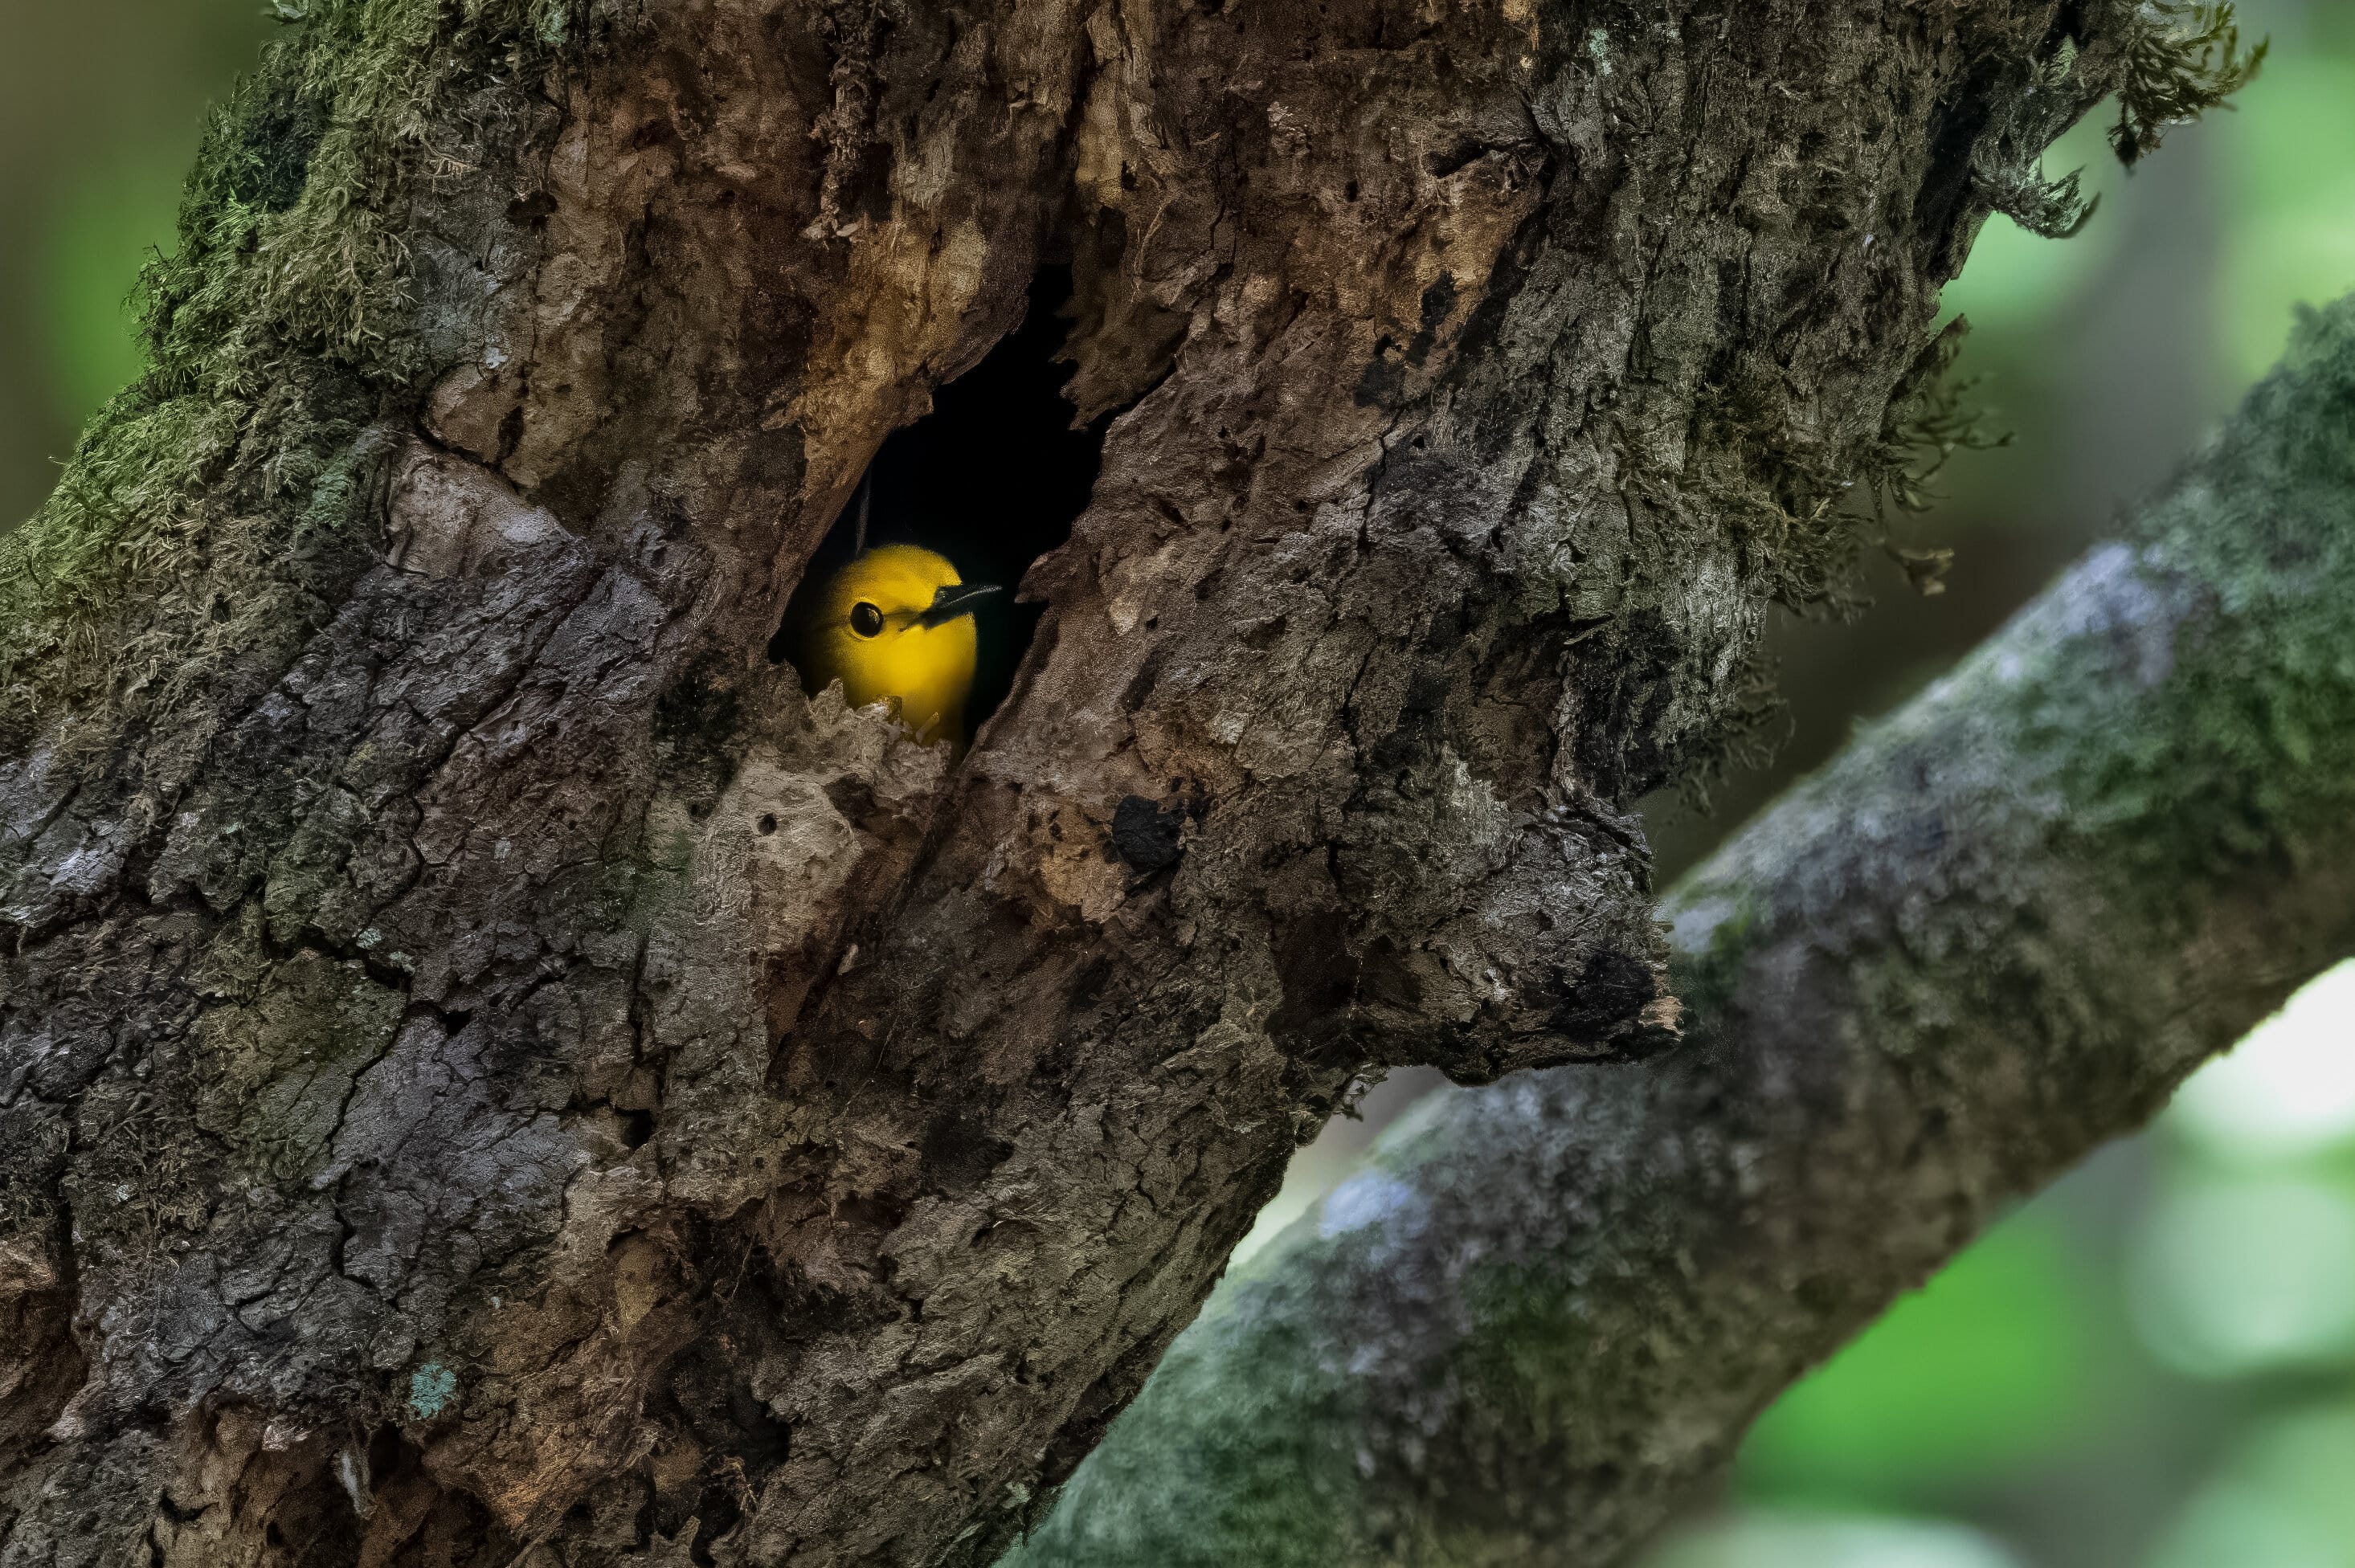 The head of a yellow bird with black eyes and beak stares out from a small cavity hole in a stump